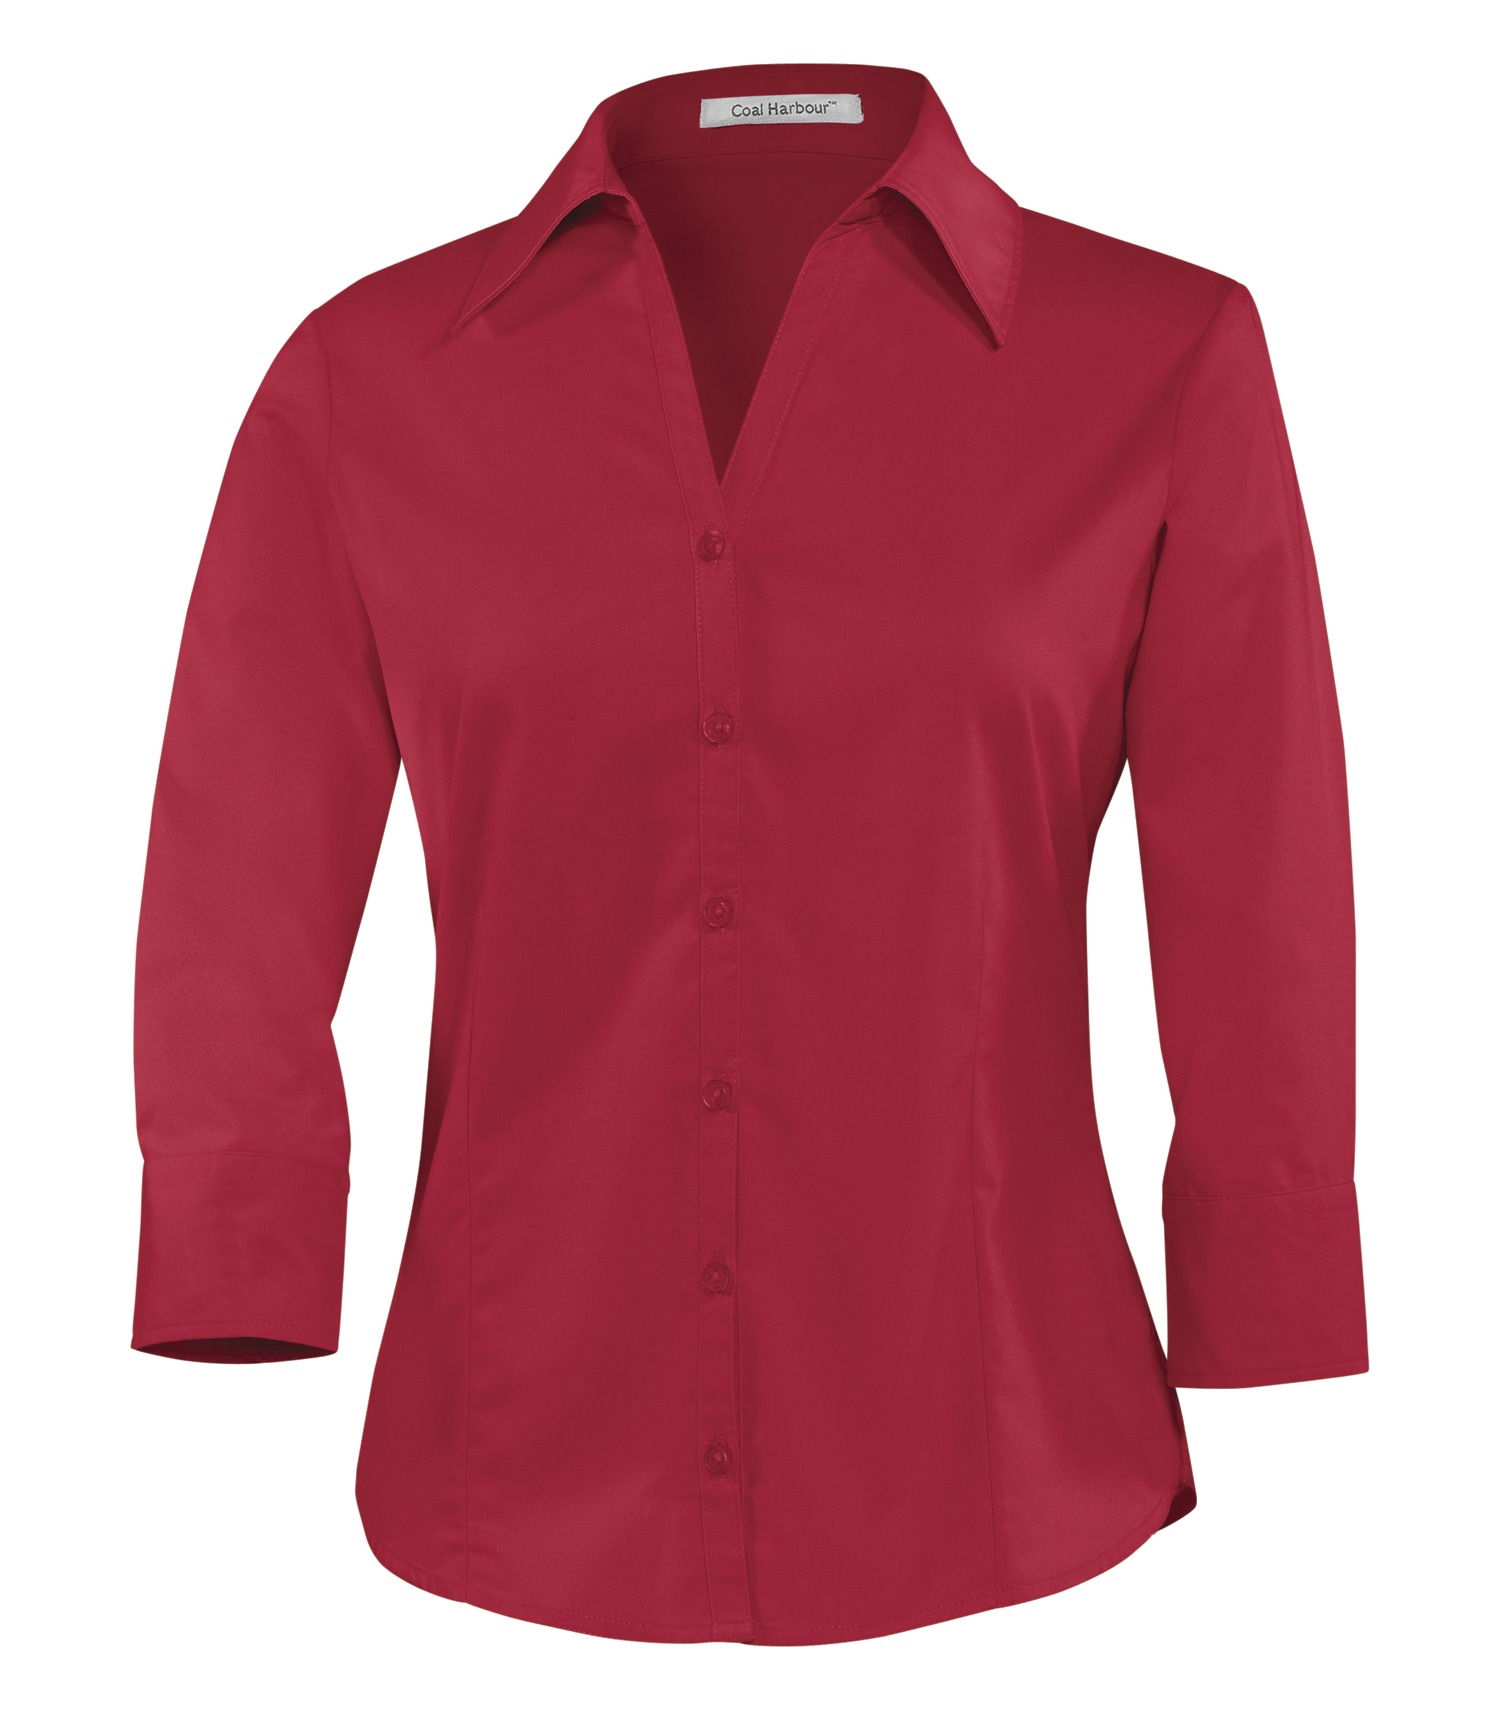 DISCONTINUED COAL HARBOUR® EASY CARE BLEND 3/4 SLEEVE LADIES' WOVEN SHIRT. L615